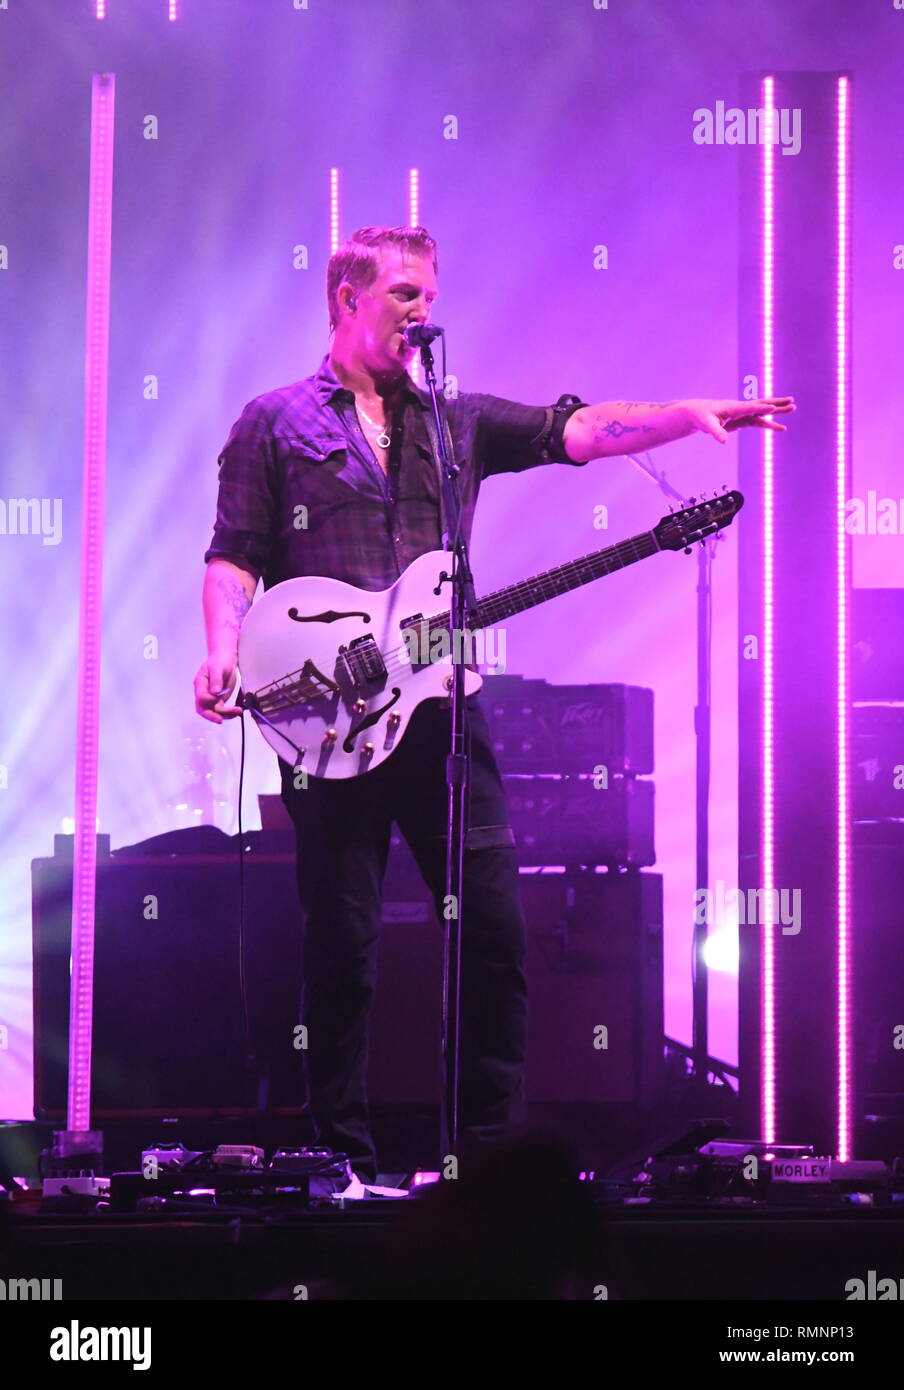 Musician Josh Homme and Queens of the Stone Age are shown performing on stage during a 'live' concert appearance. Stock Photo